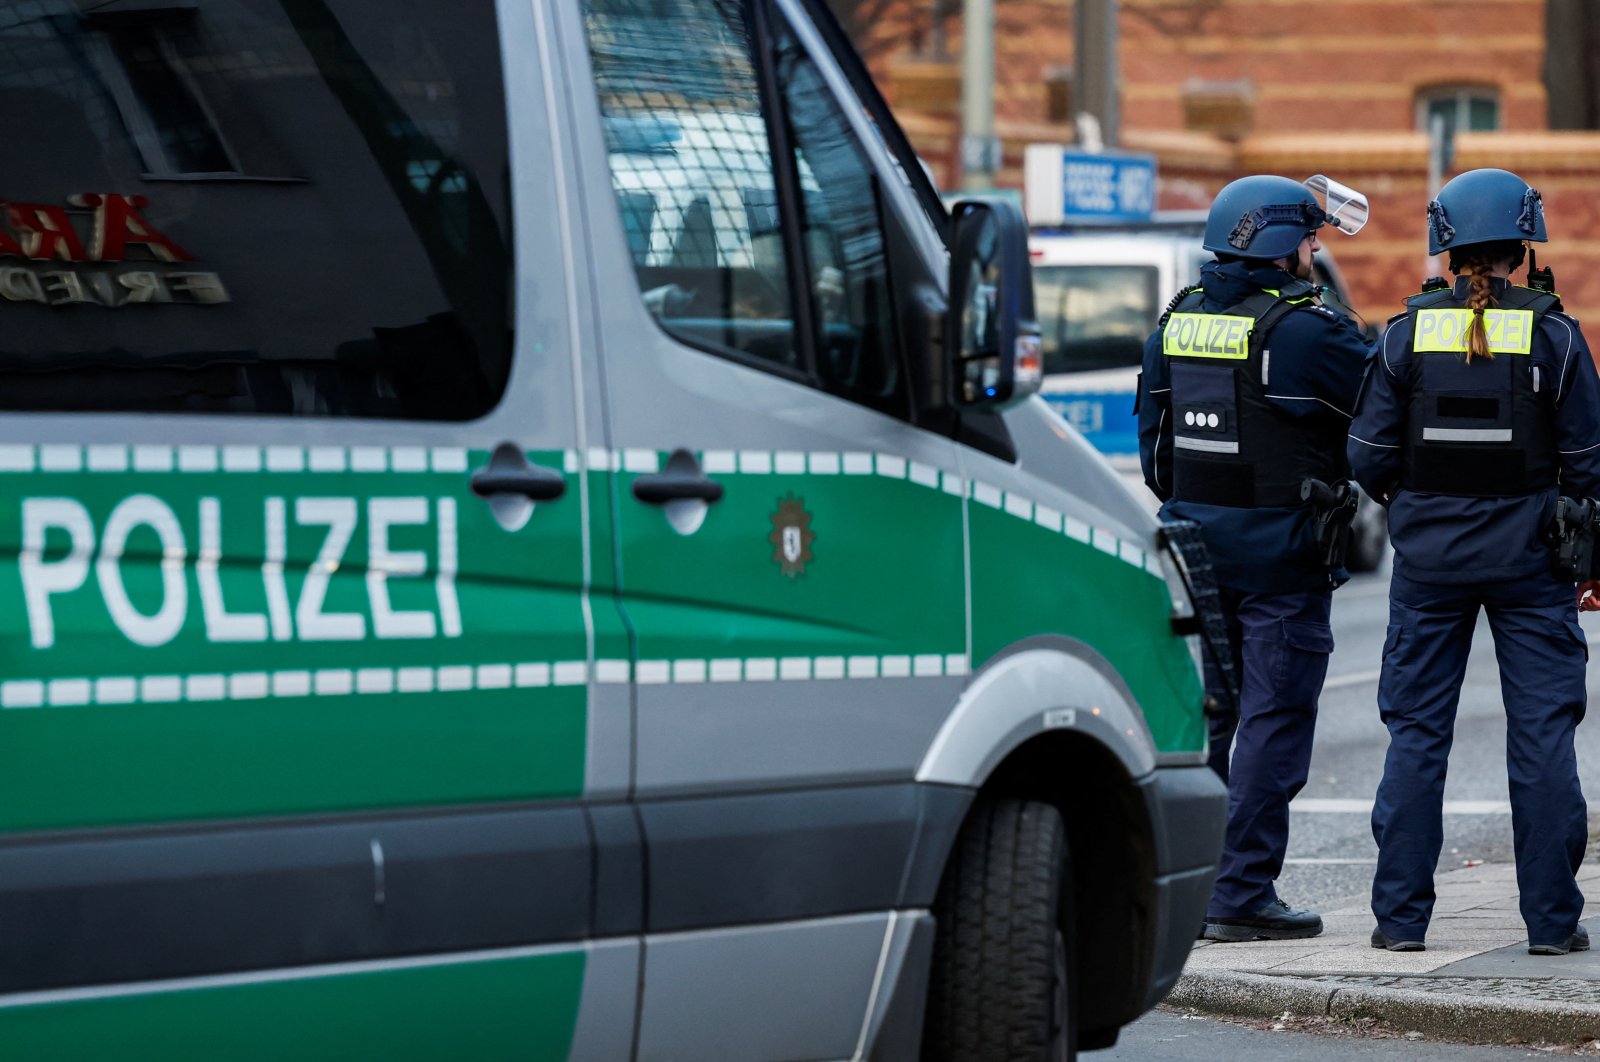 Police officers secure the area around a job center after an attack alarm was triggered according to police, in Berlin, Germany, Feb. 16, 2023. (Reuters File Photo)